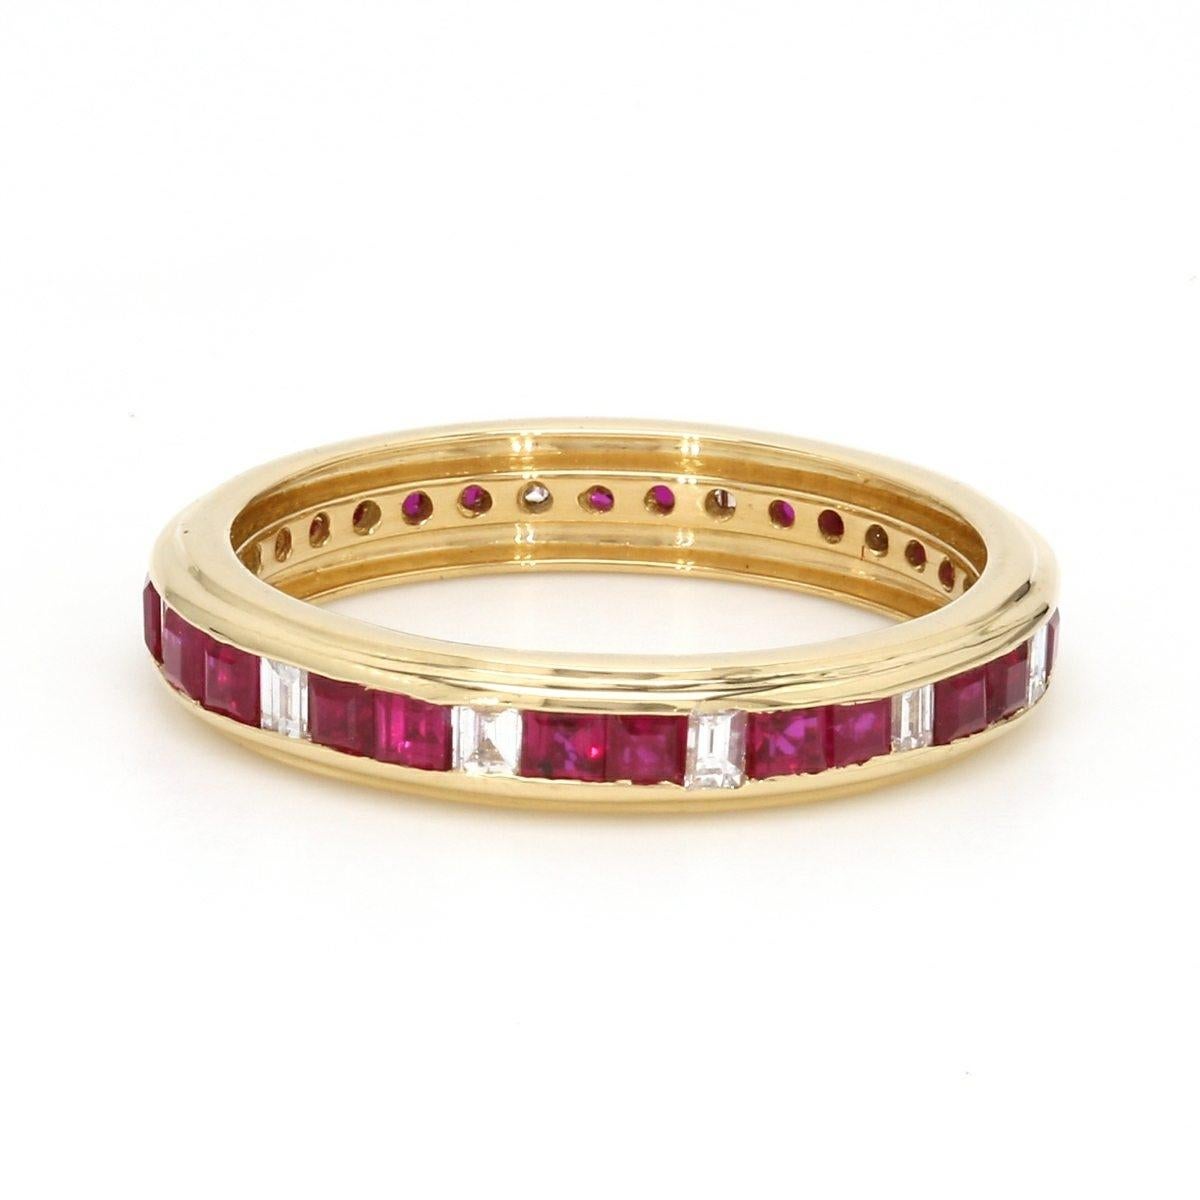 A Beautiful Handcrafted Ring in 18 Karat Yellow Gold  with Natural Red Rubies from Mozambique Mines and Diamonds . A perfect Infinity Ring for occasion

Red Ruby Details
Pieces : 24 Pieces  
Weight : 1.13 Carat 
AAA Quality Sapphire

Natural Diamond